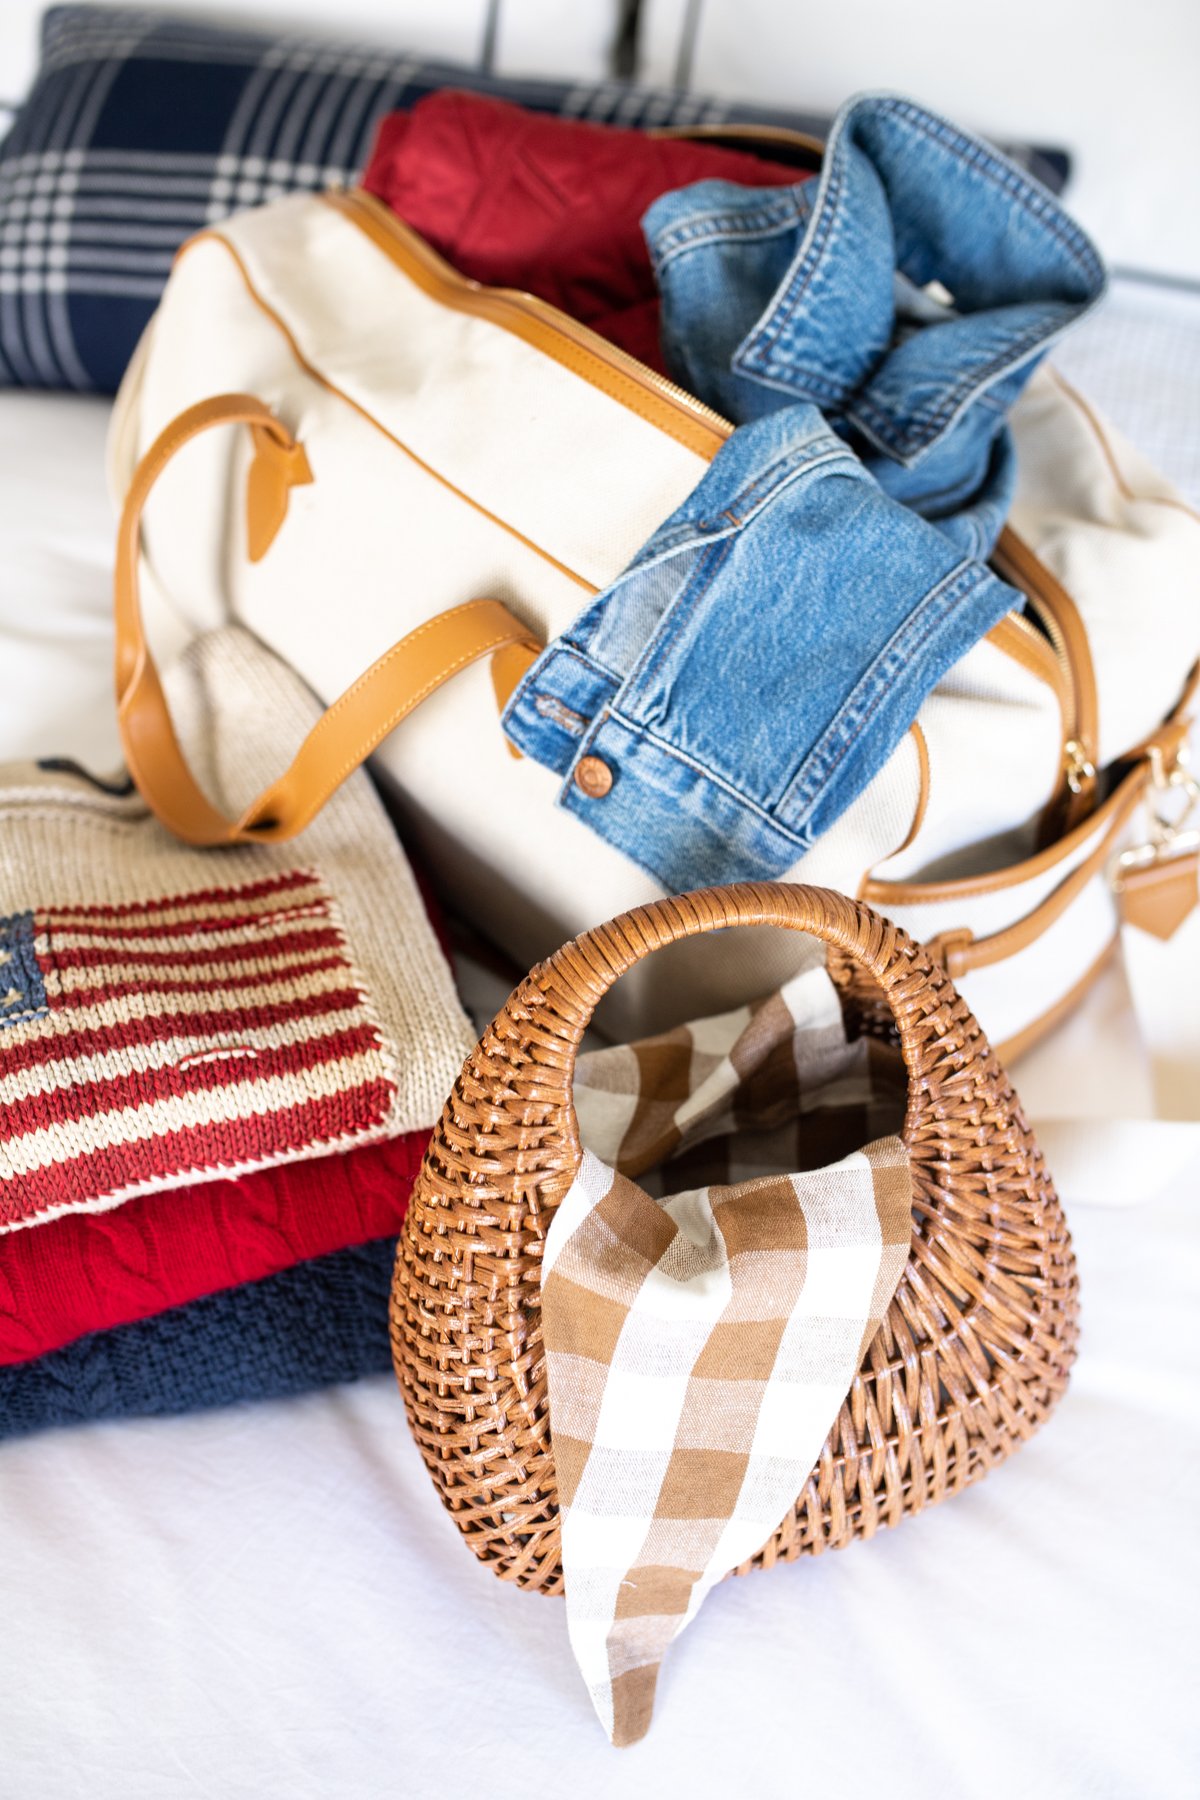 4th of July Packing List x Stacie Flinner-11